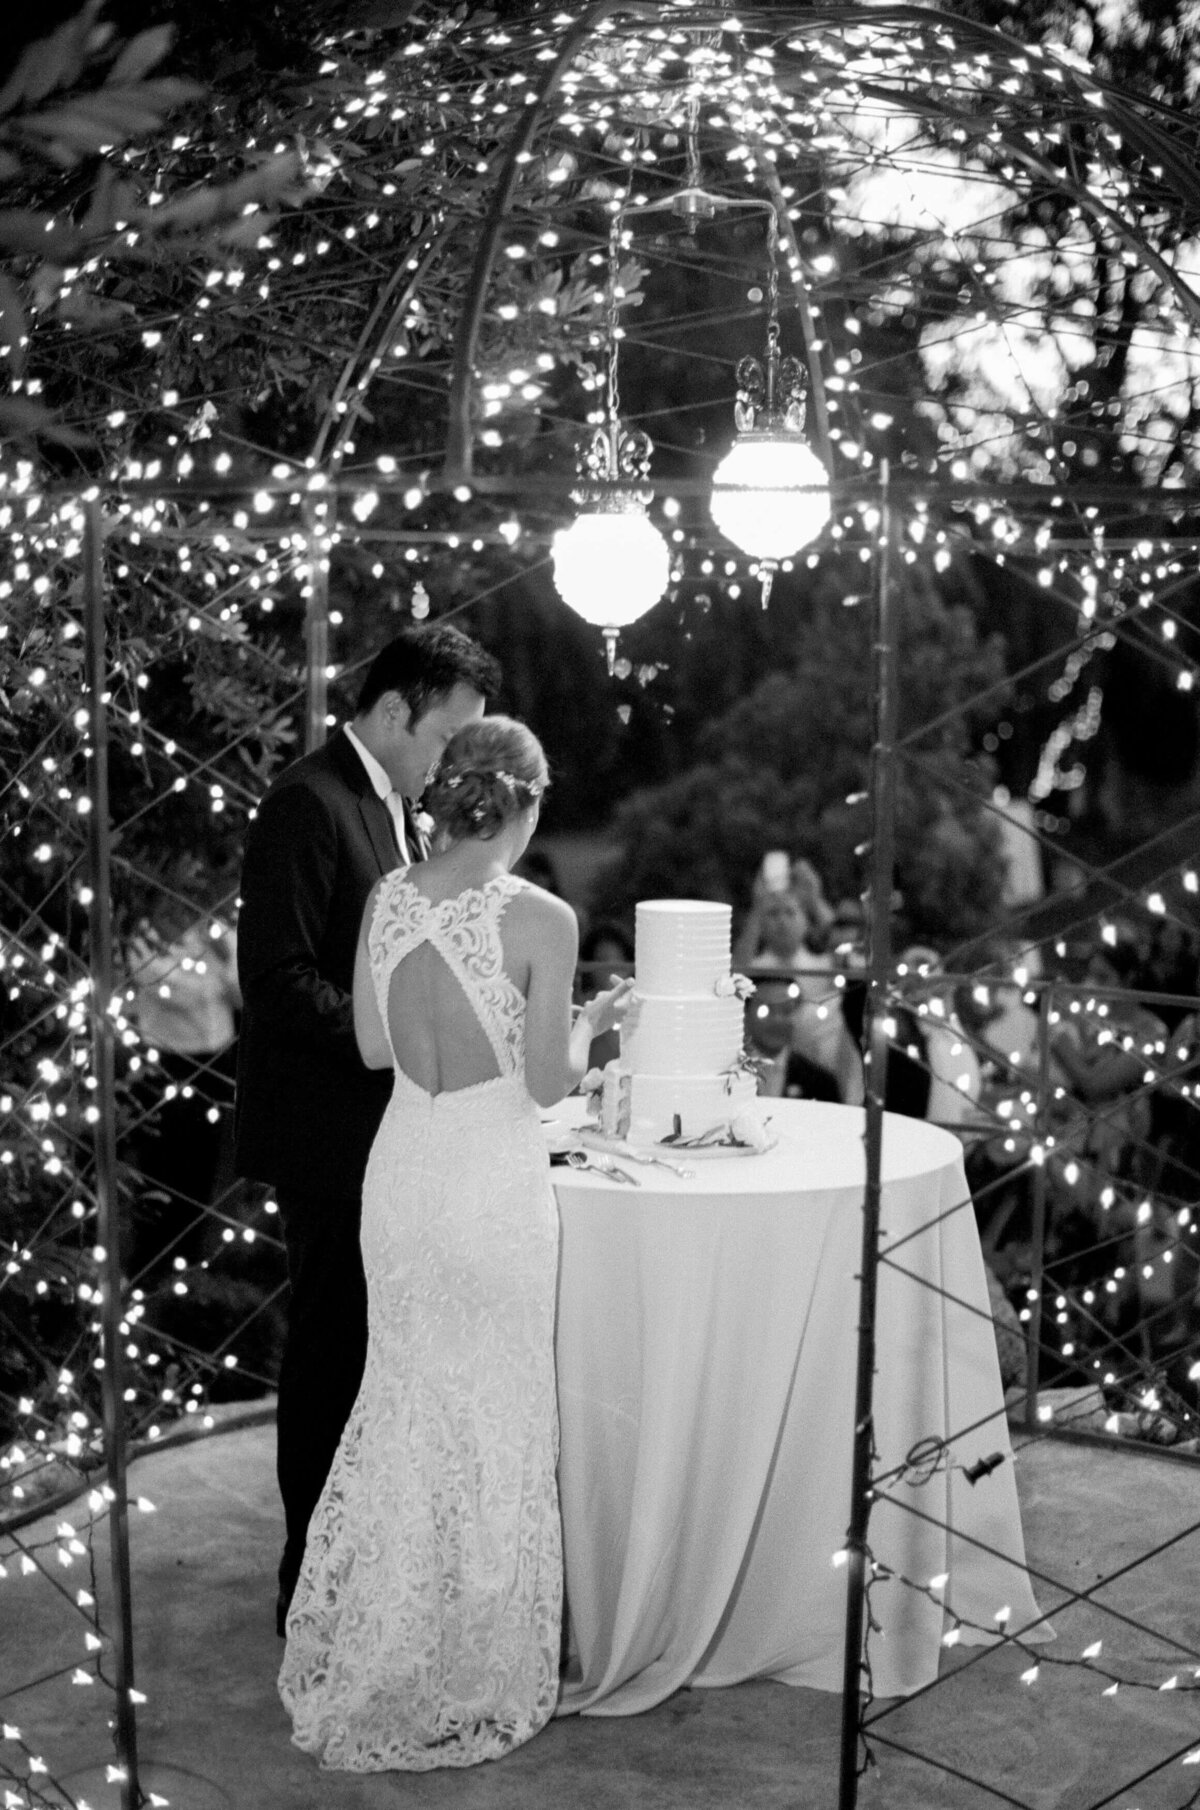 Sonoma Estate Photographer captures the afterparty with the bride and groom preparing to cut the wedding cake.